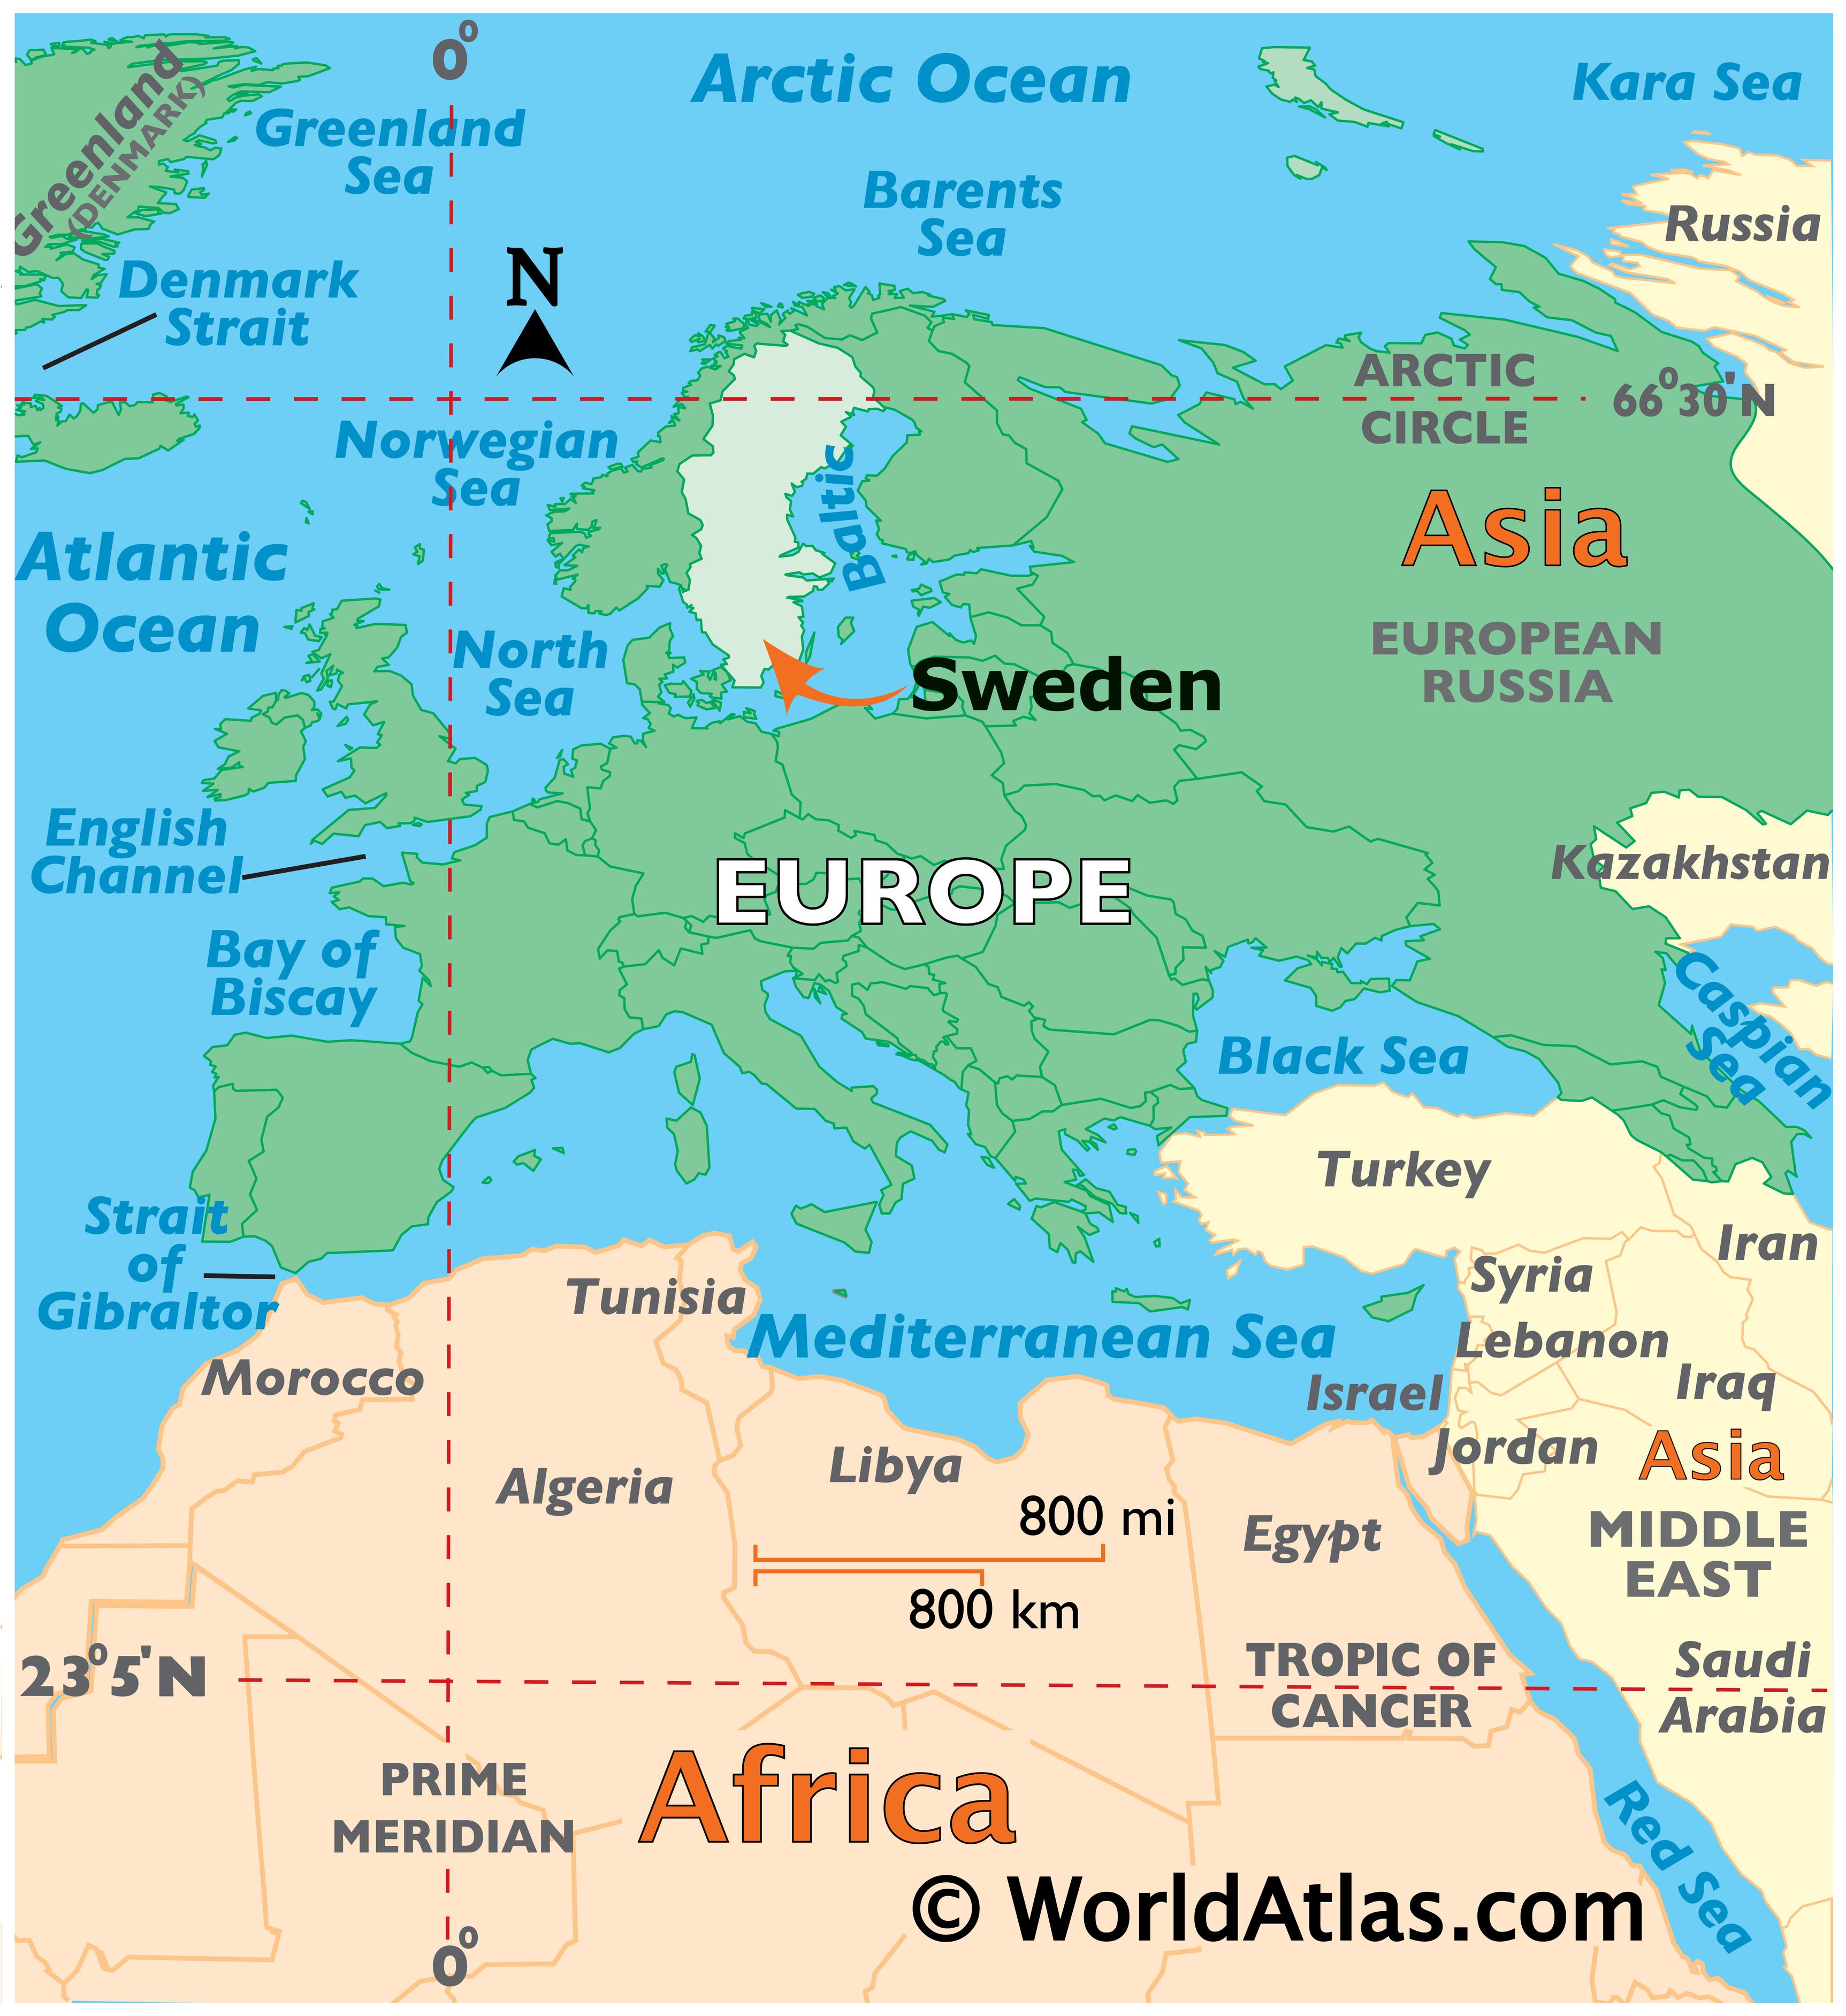 Sweden On Map Of World Sweden Map / Geography of Sweden / Map of Sweden   Worldatlas.com